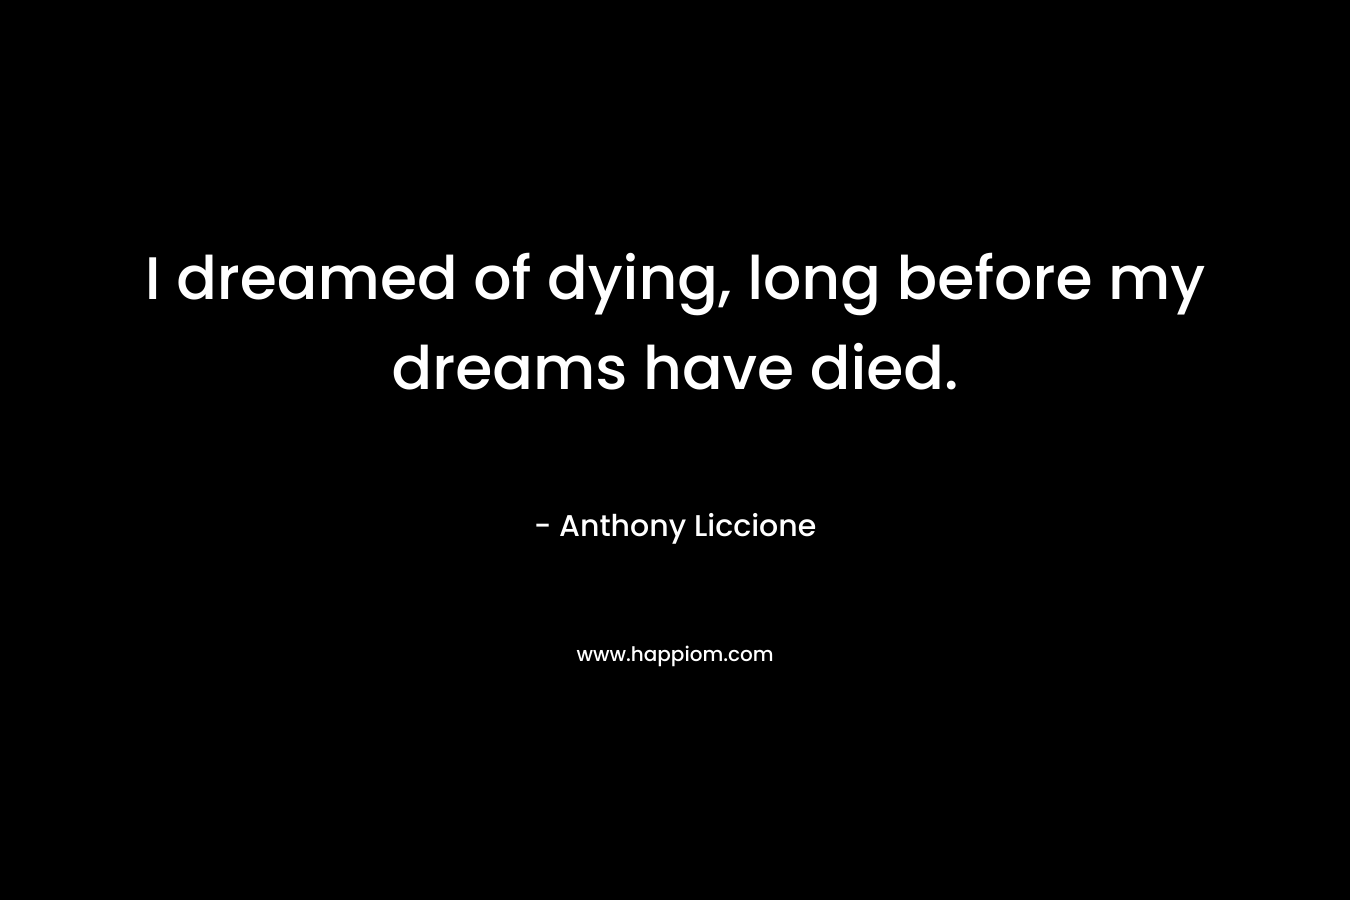 I dreamed of dying, long before my dreams have died.